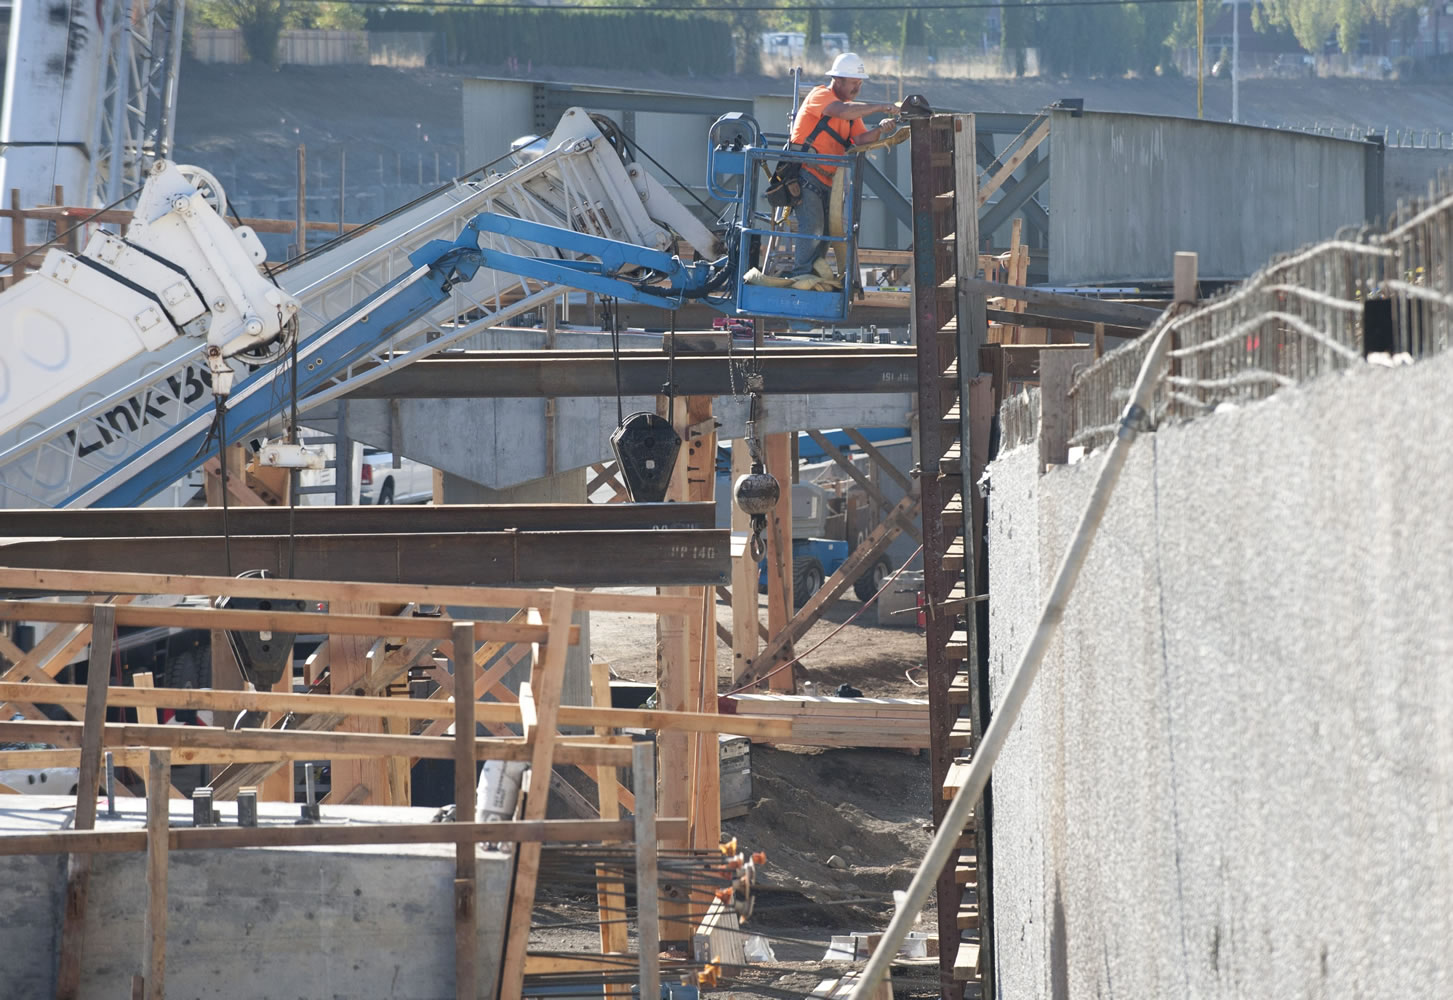 Workers under lead contractor Cascade Bridge of Vancouver are in the process of installing 15 huge steel girders as part of a new interchange at Interstate 205 and Northeast 18th Street. The final girders will be installed overnight Friday into Saturday.